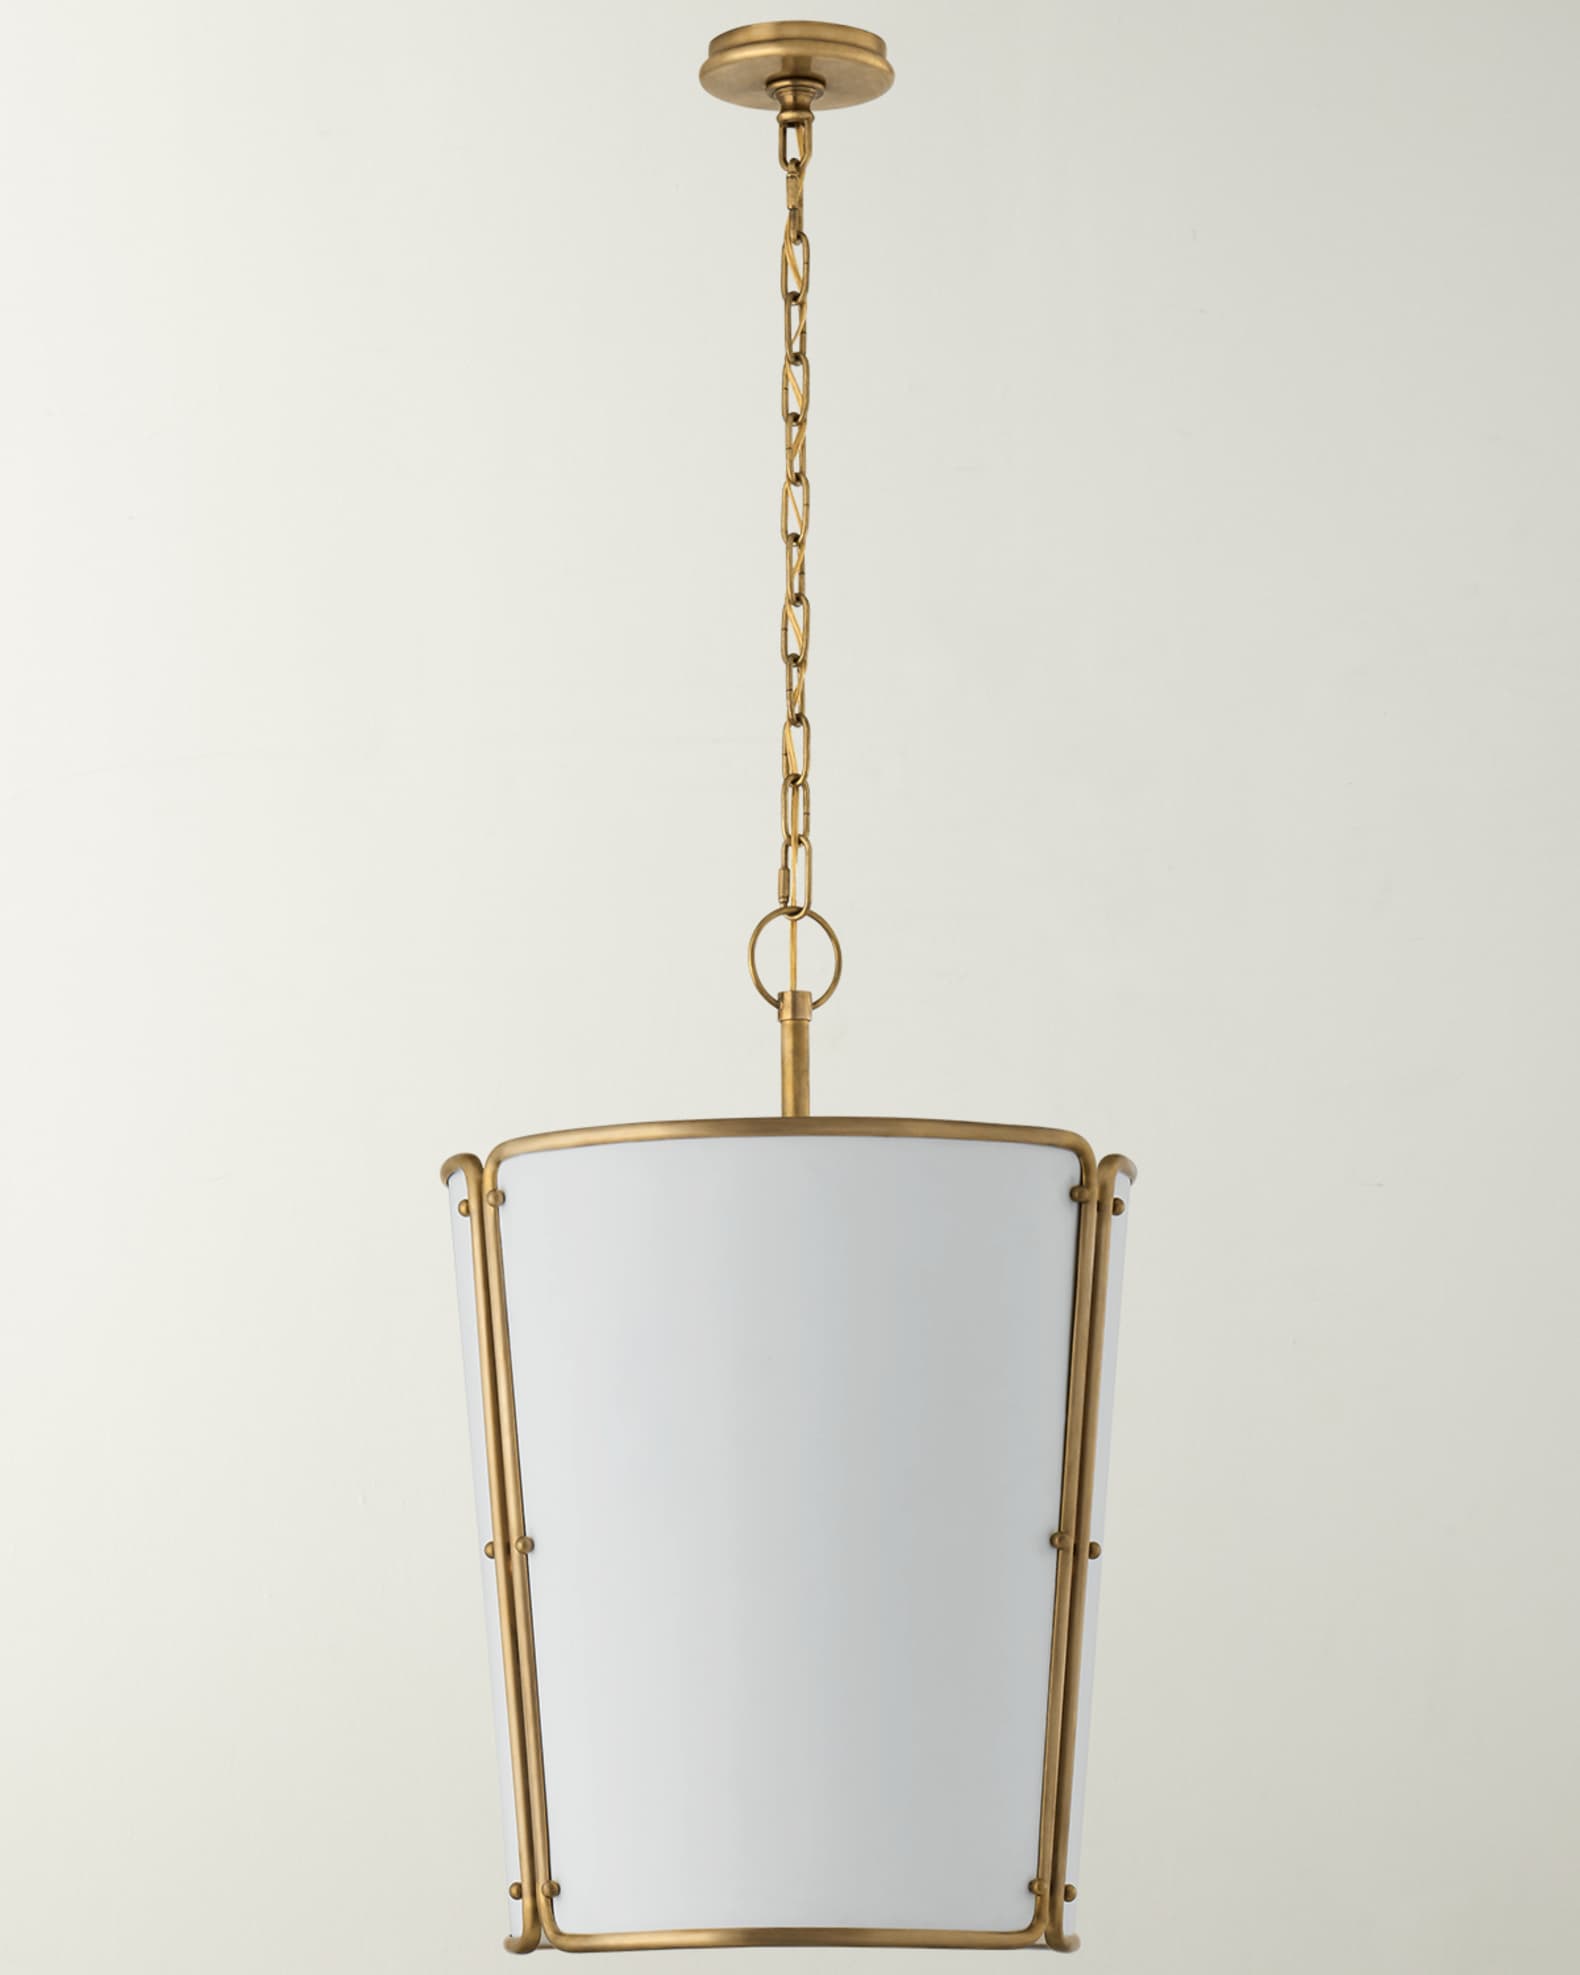 Visual Comfort Signature Hastings Medium Pendant By Carrier And